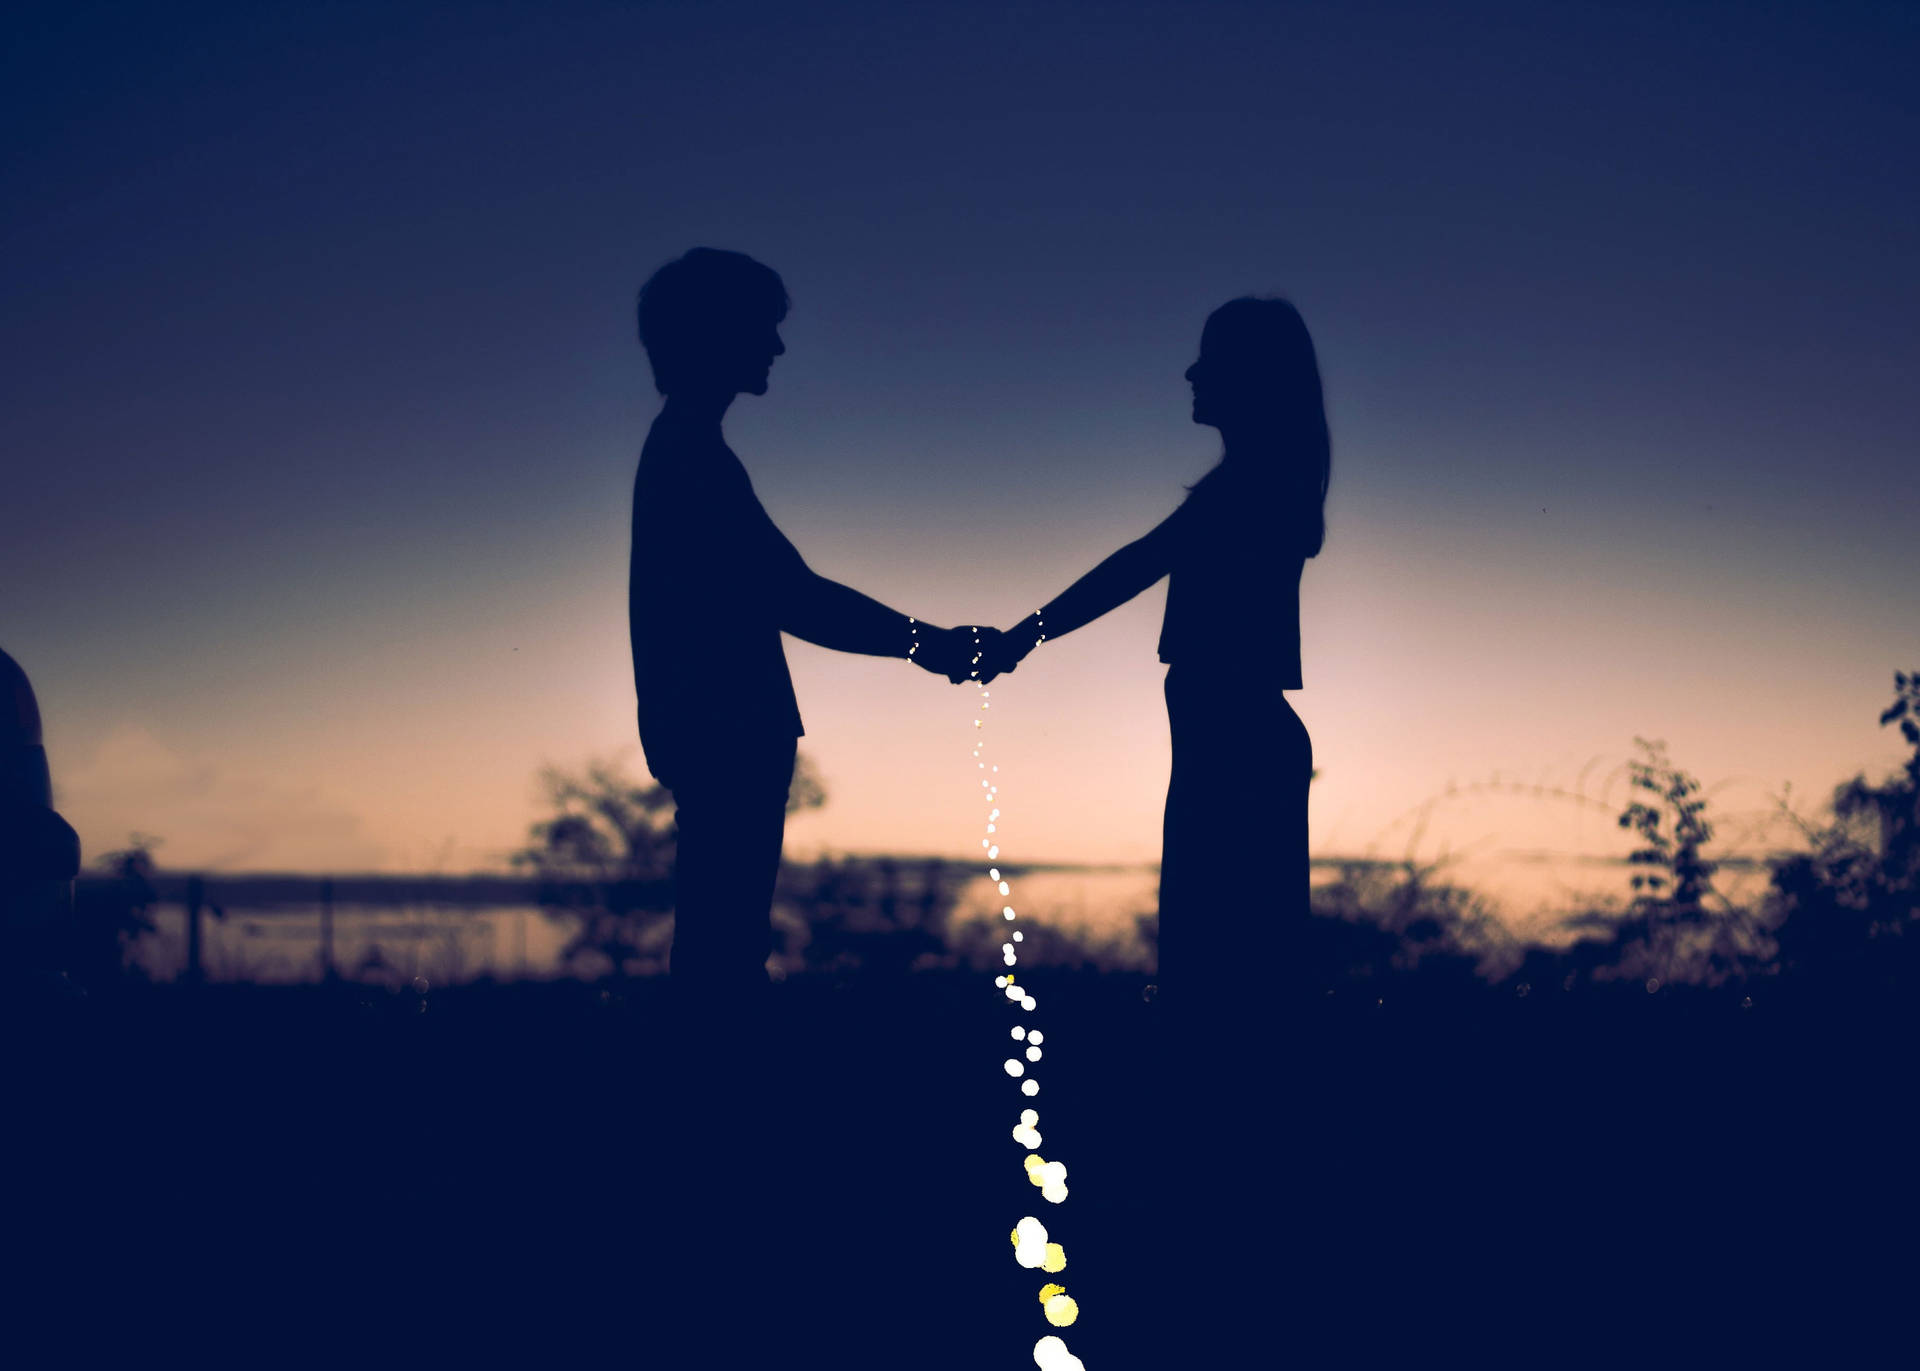 Holding Hands Silhouette On Gradient Sky Background